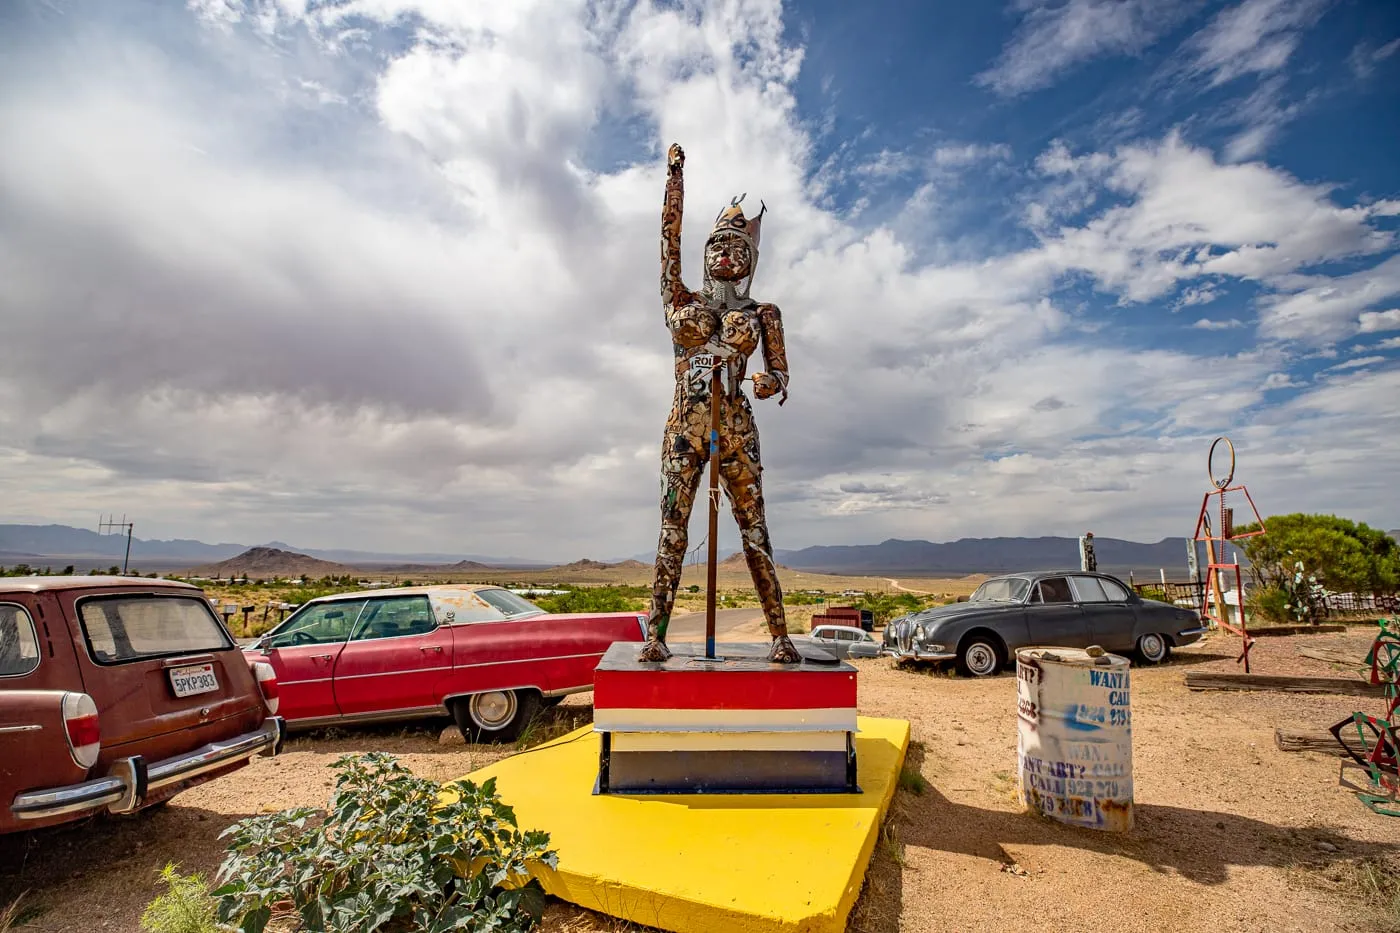 Guardian of Route 66 sculpture by Gregg Arnold at Antares Point Visitor Center & Gift Shop on Route 66